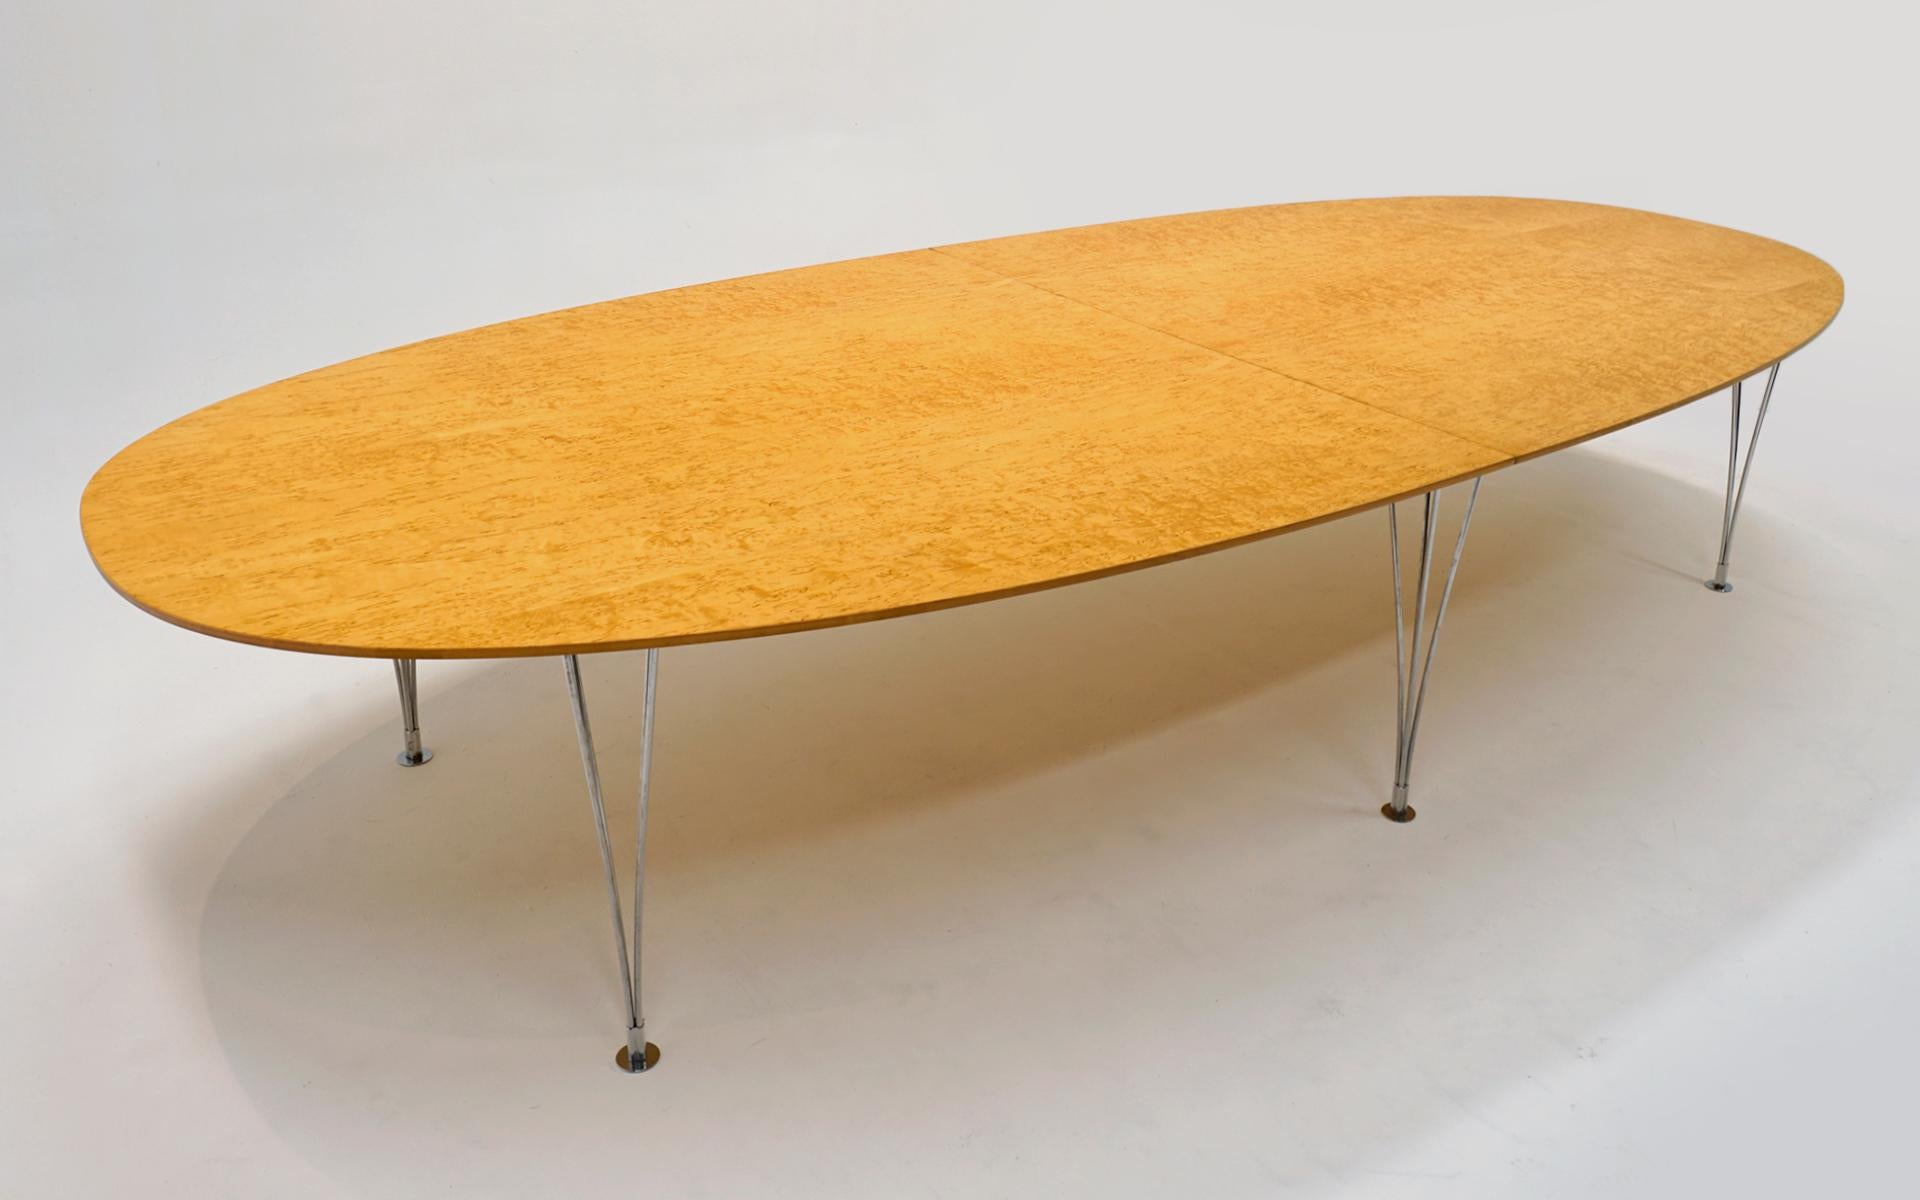 12 Foot Super Ellipse Dining/Conference Table by Arne Jocobsen, Piet Hein, et al In Good Condition For Sale In Kansas City, MO